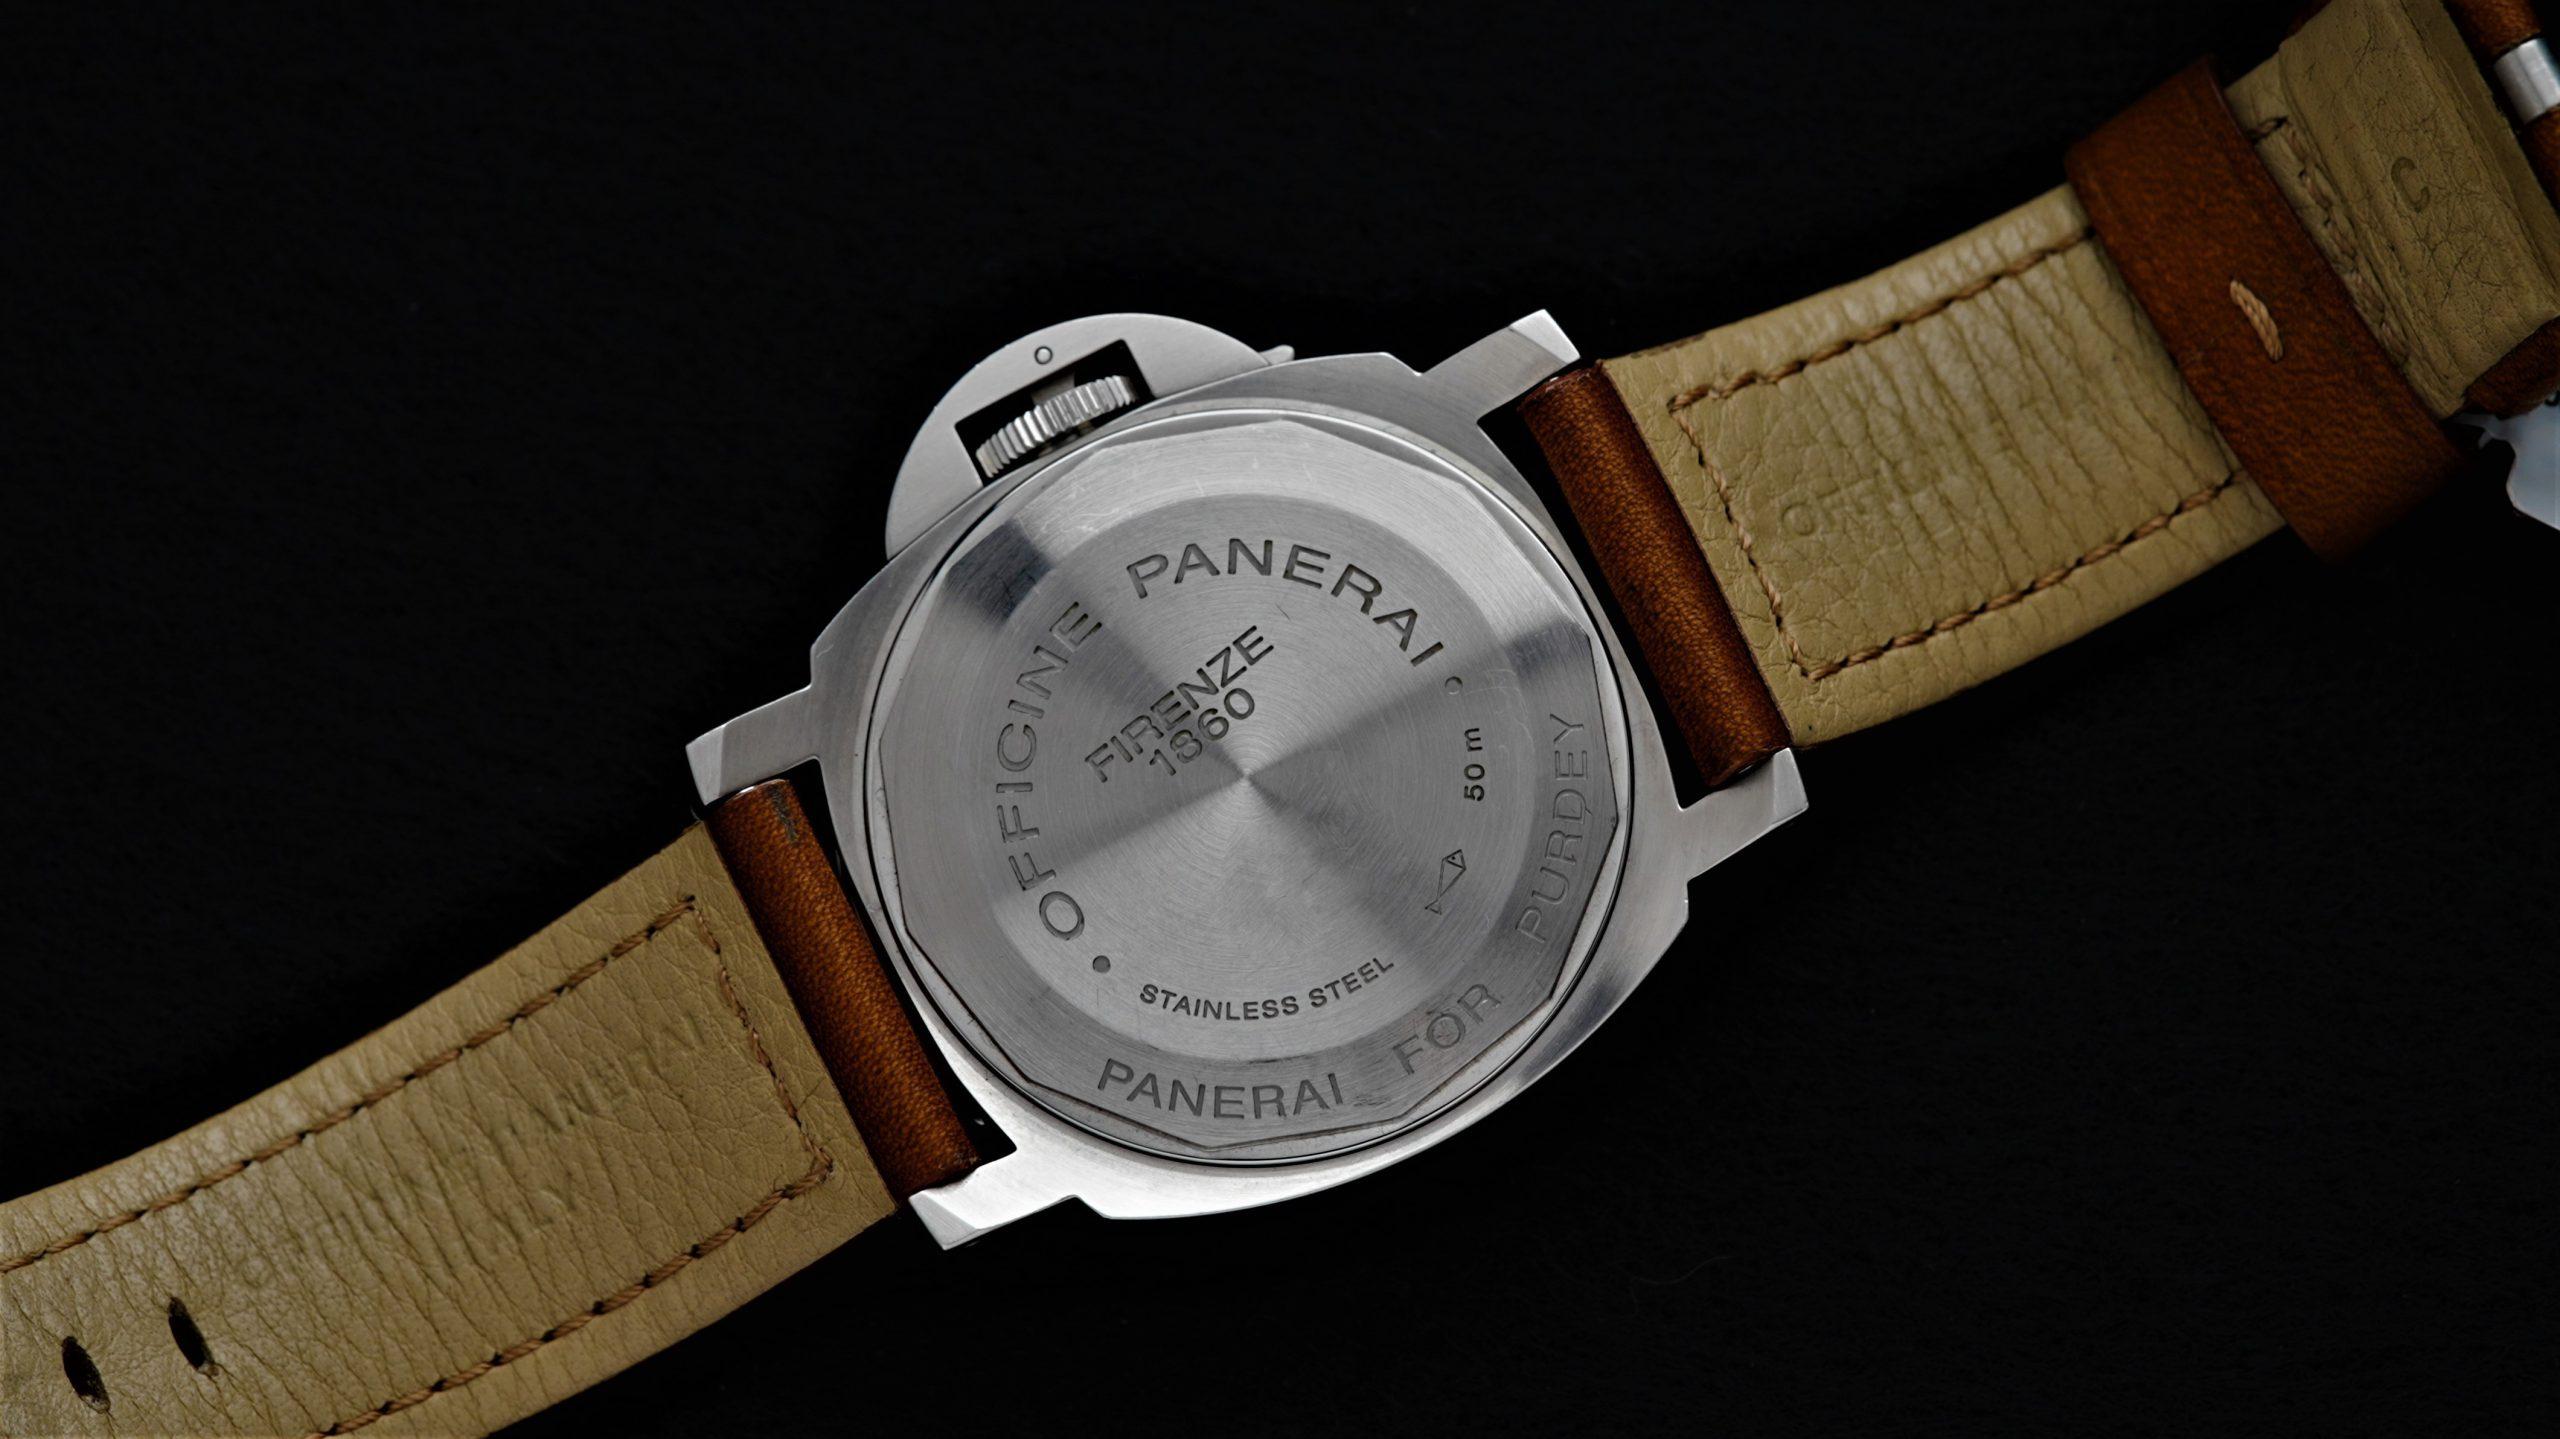 Back side of the Panerai Luminor For Purdey Limired Edition.